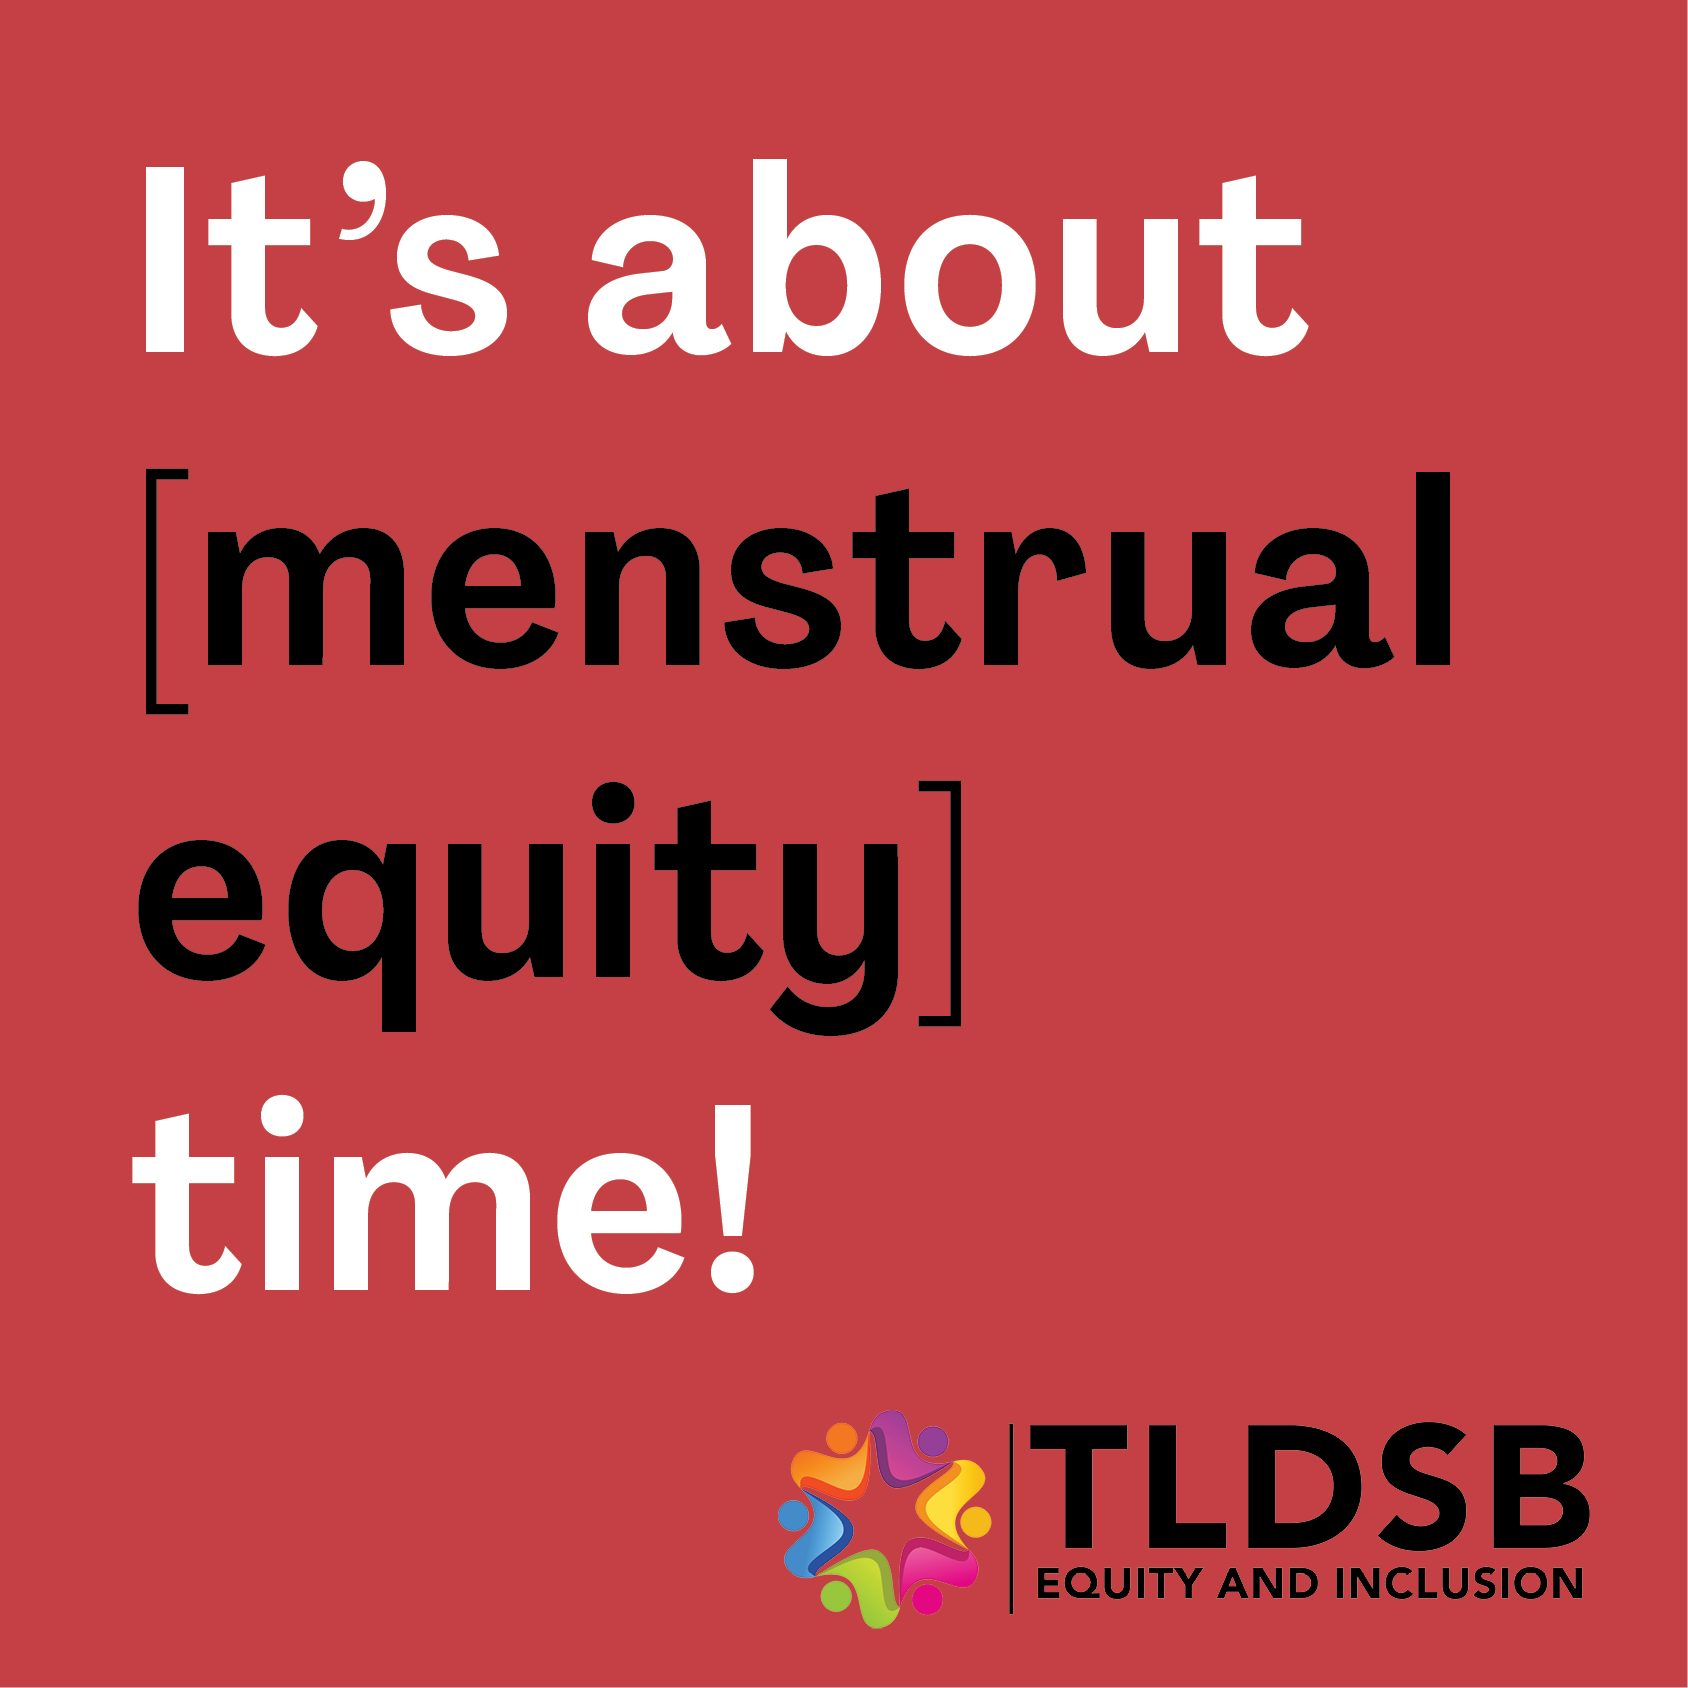 It's about menstrual equity time.